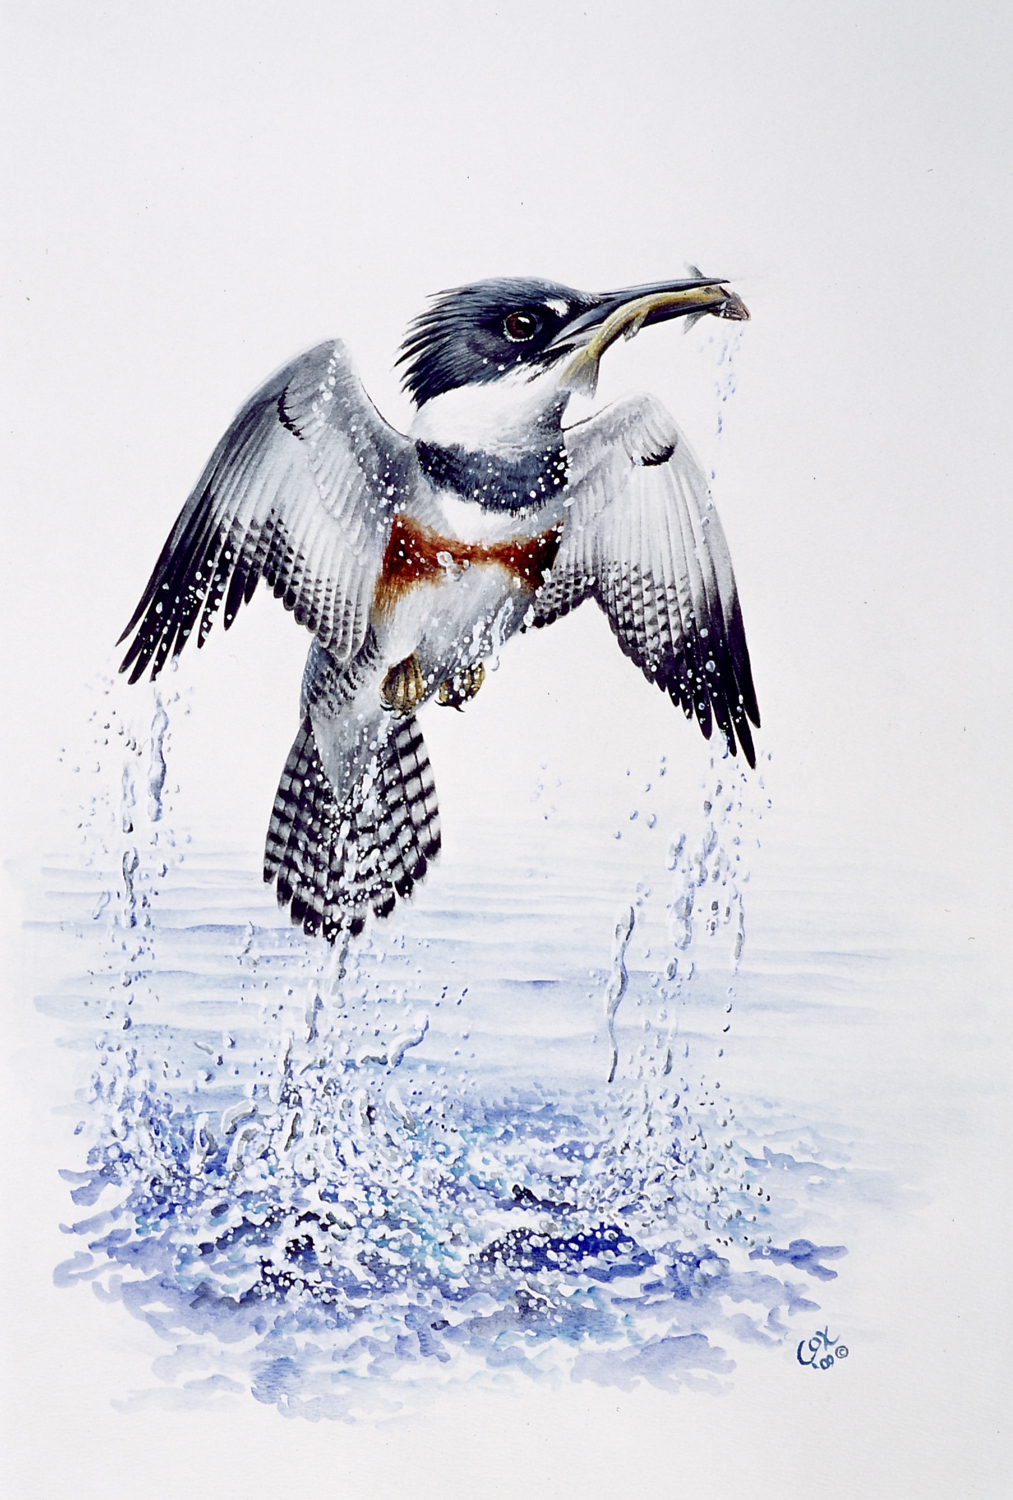 Belted Kingfisher, Watercolour & acrylic on paper, 22x15"